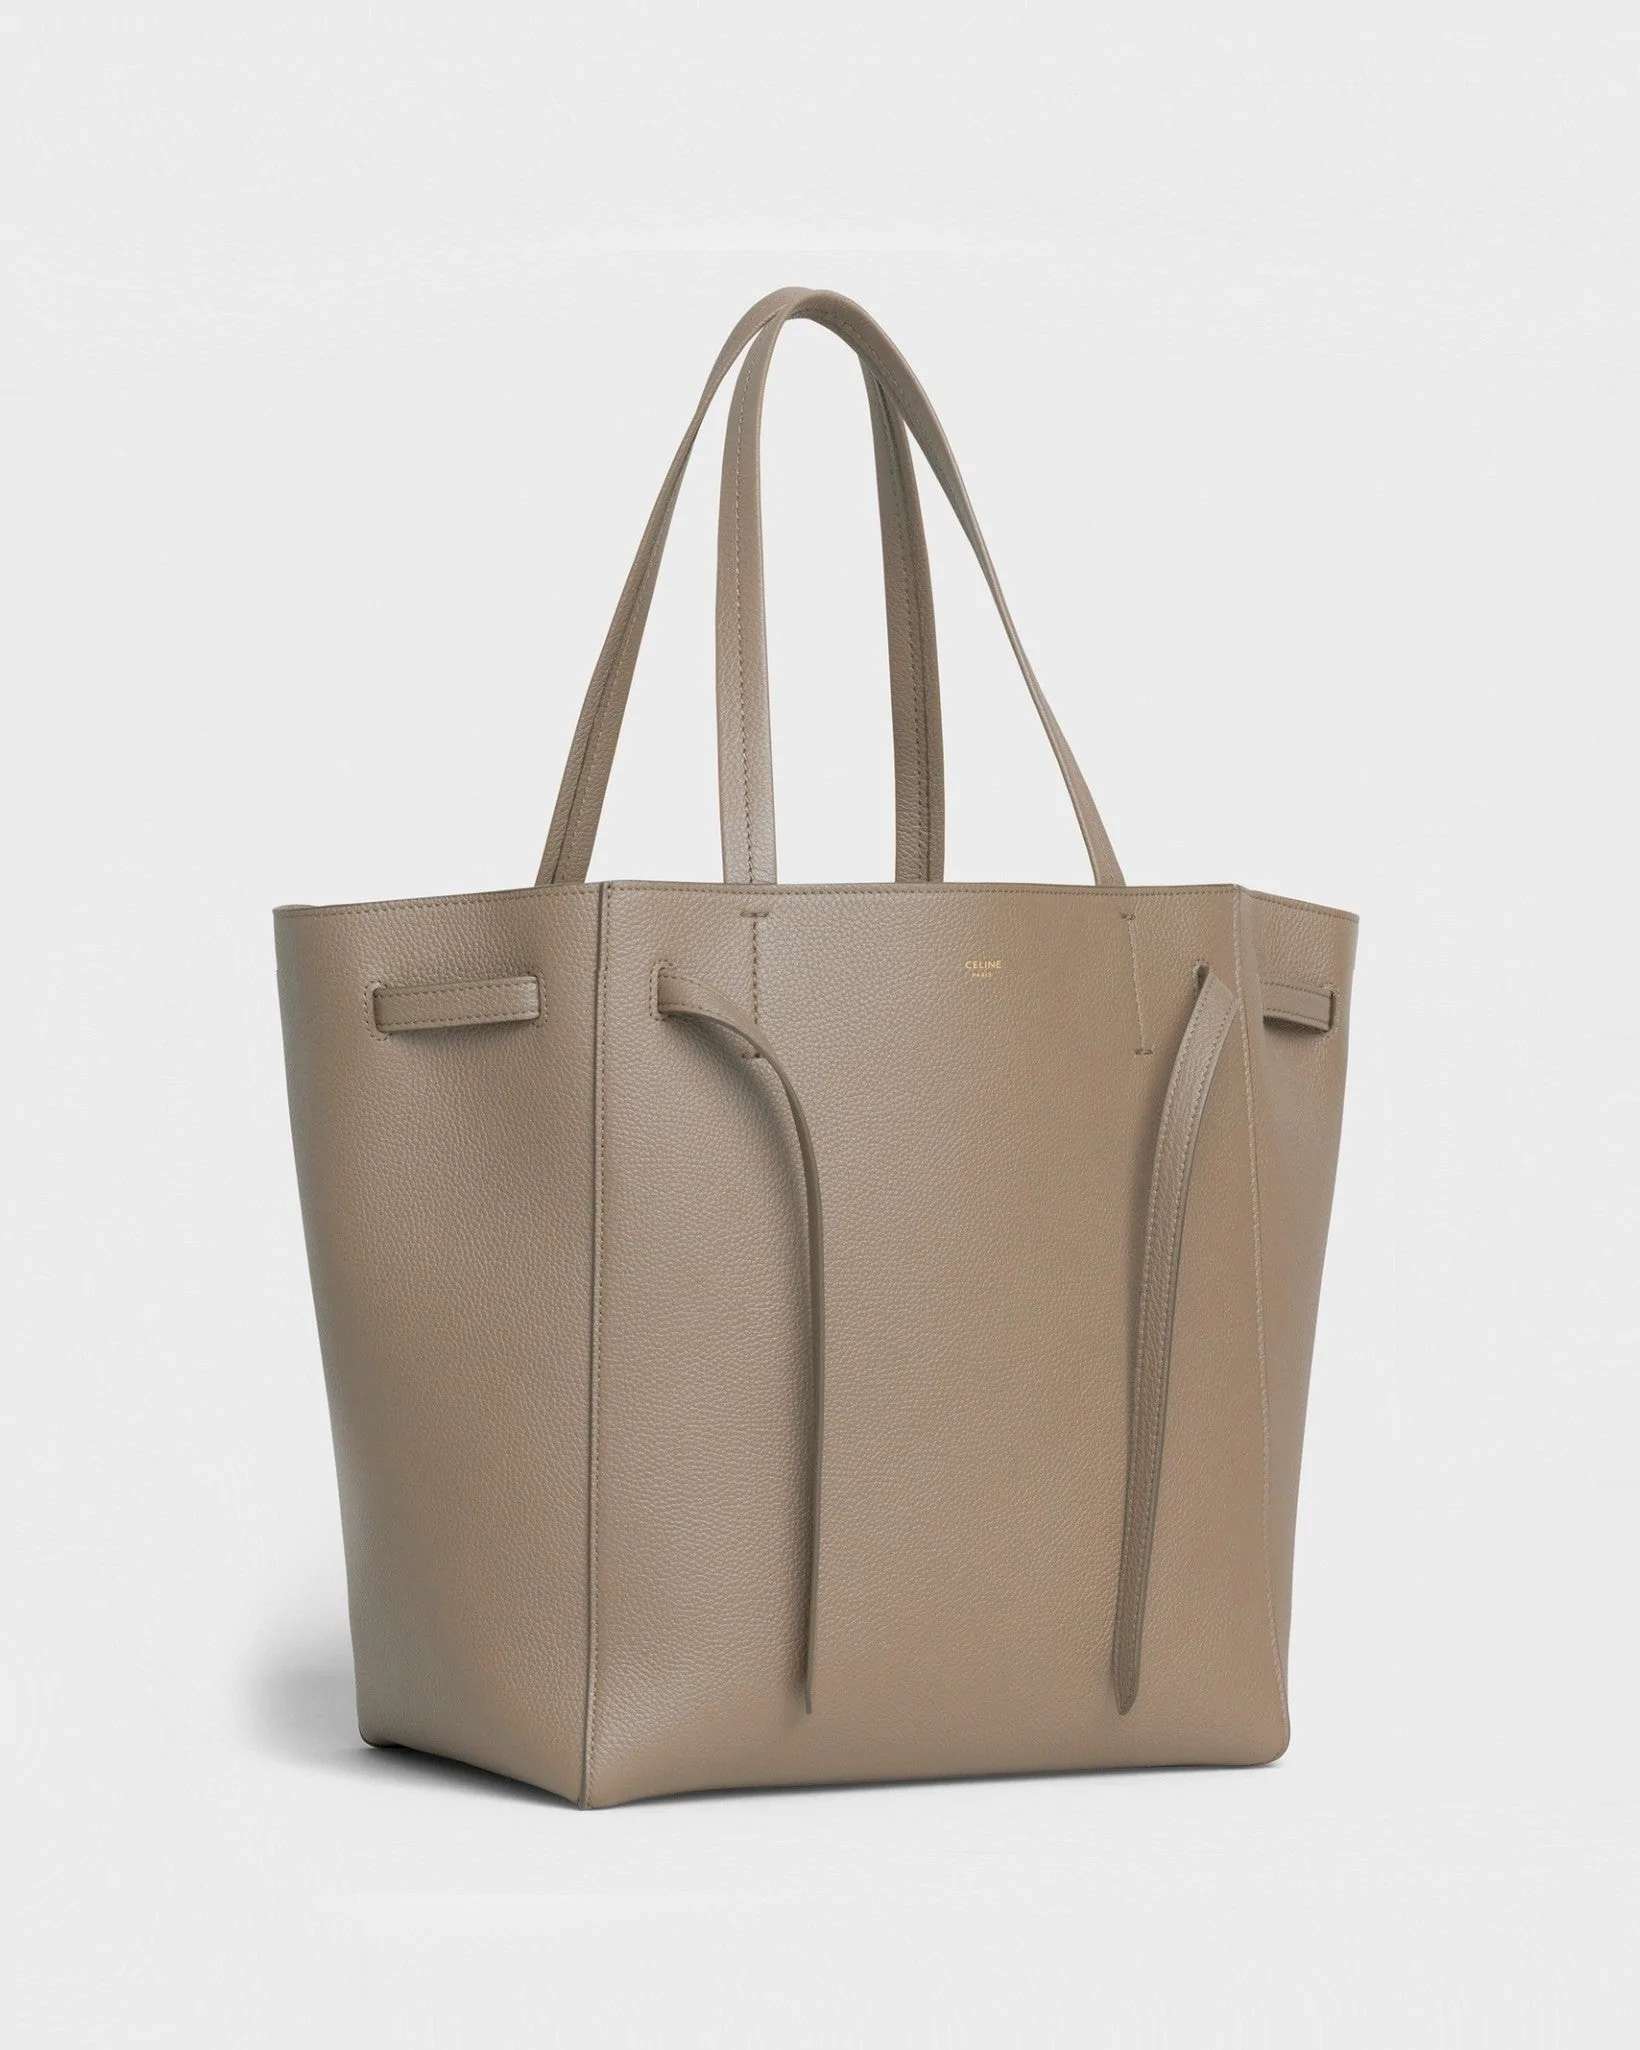 Celine Small Cabas Phantom In Soft Grained Calfskin Taupe